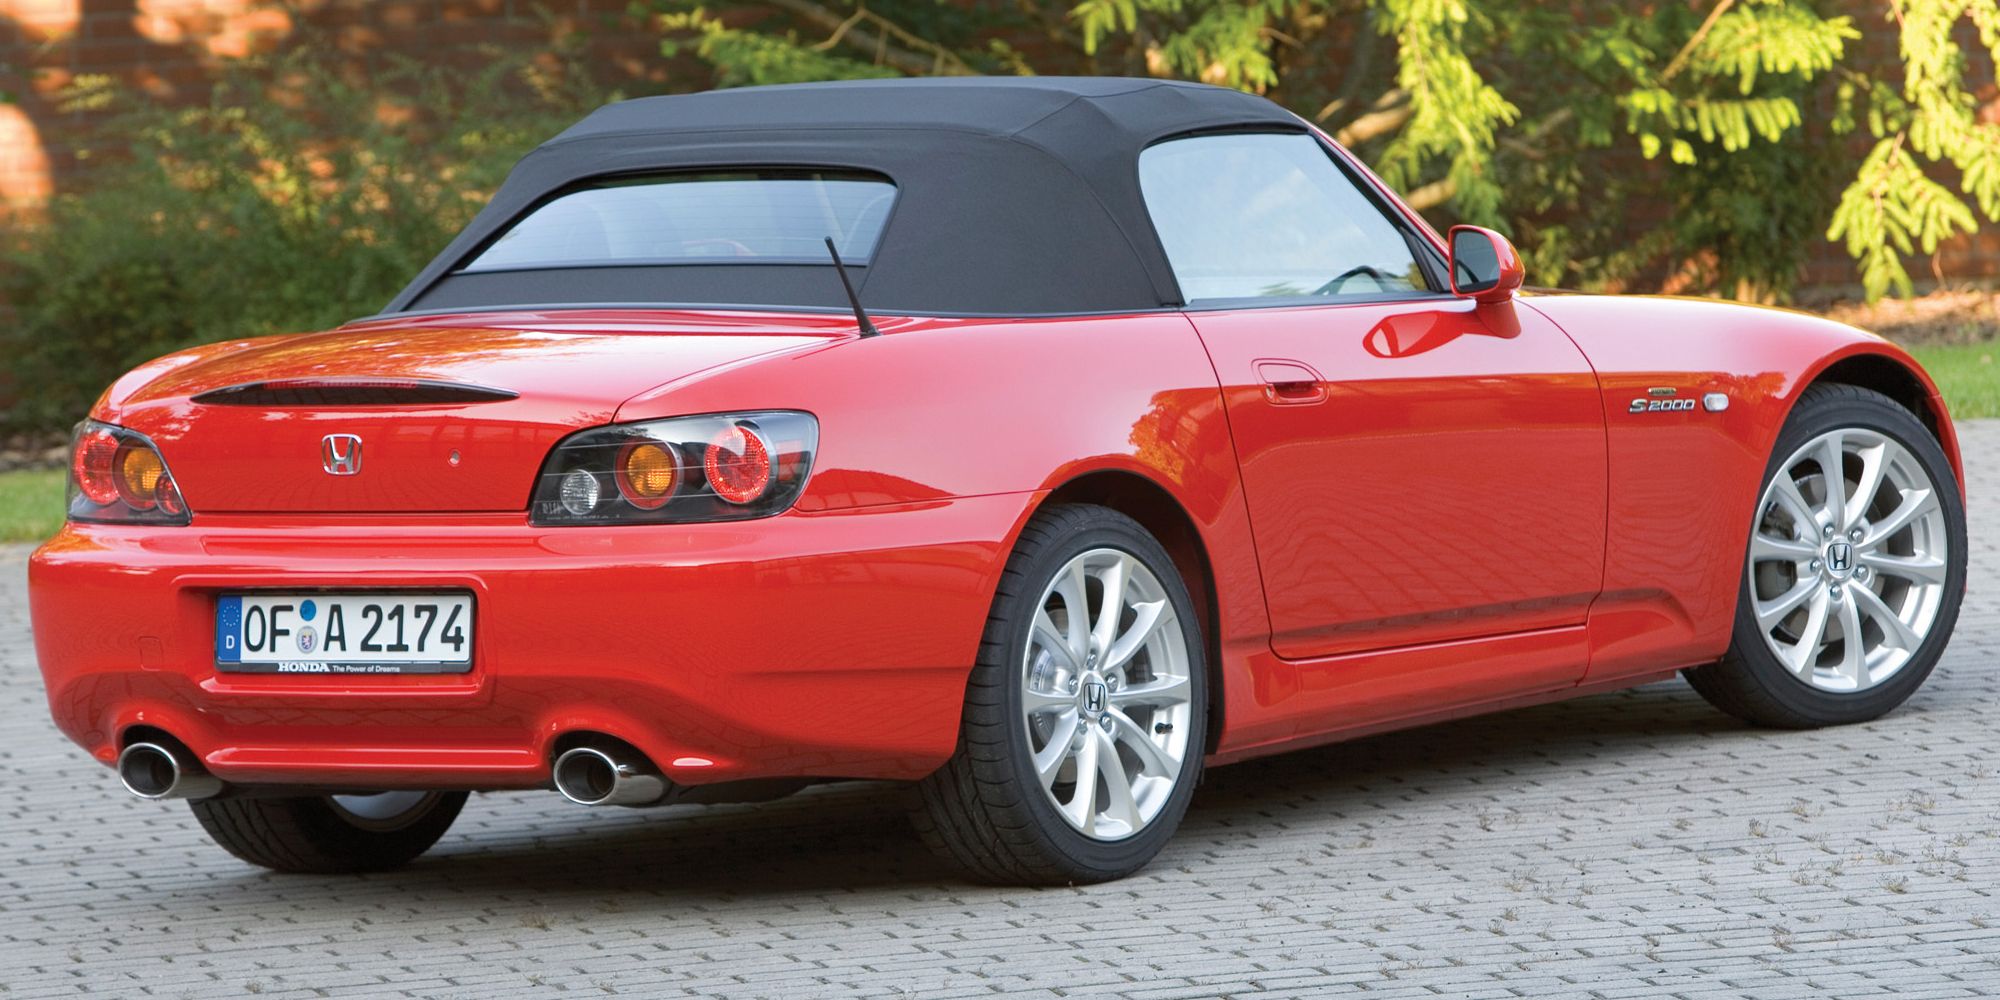 Rear 3/4 view of a red AP2 S2000